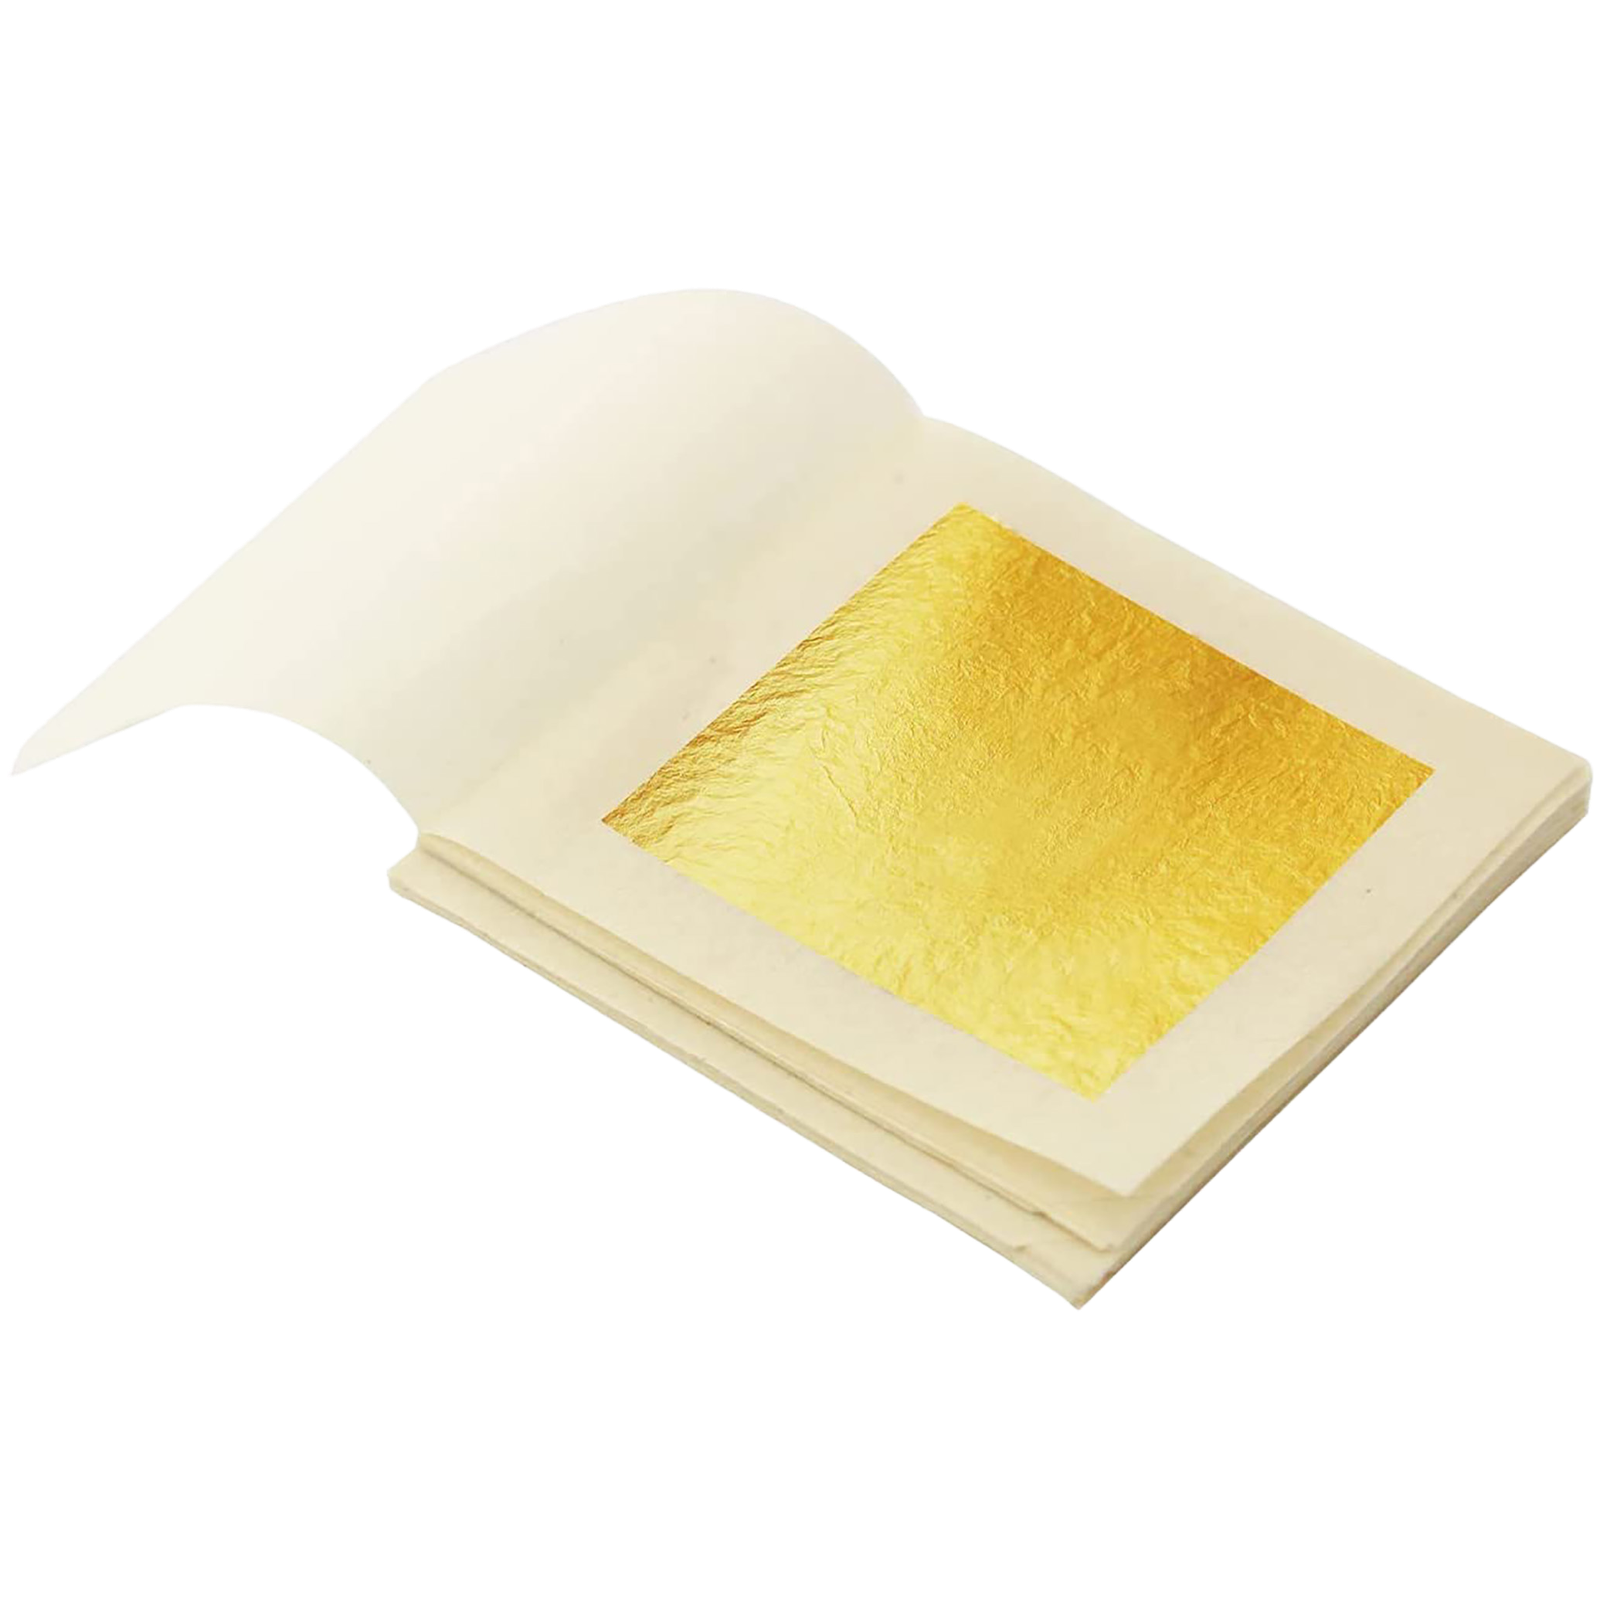 SIM GOLD LEAF Feuilles d' Or Alimentaire 35 mm X 35 mm Comestible 100% 24  carats Pur - Feuille d'or